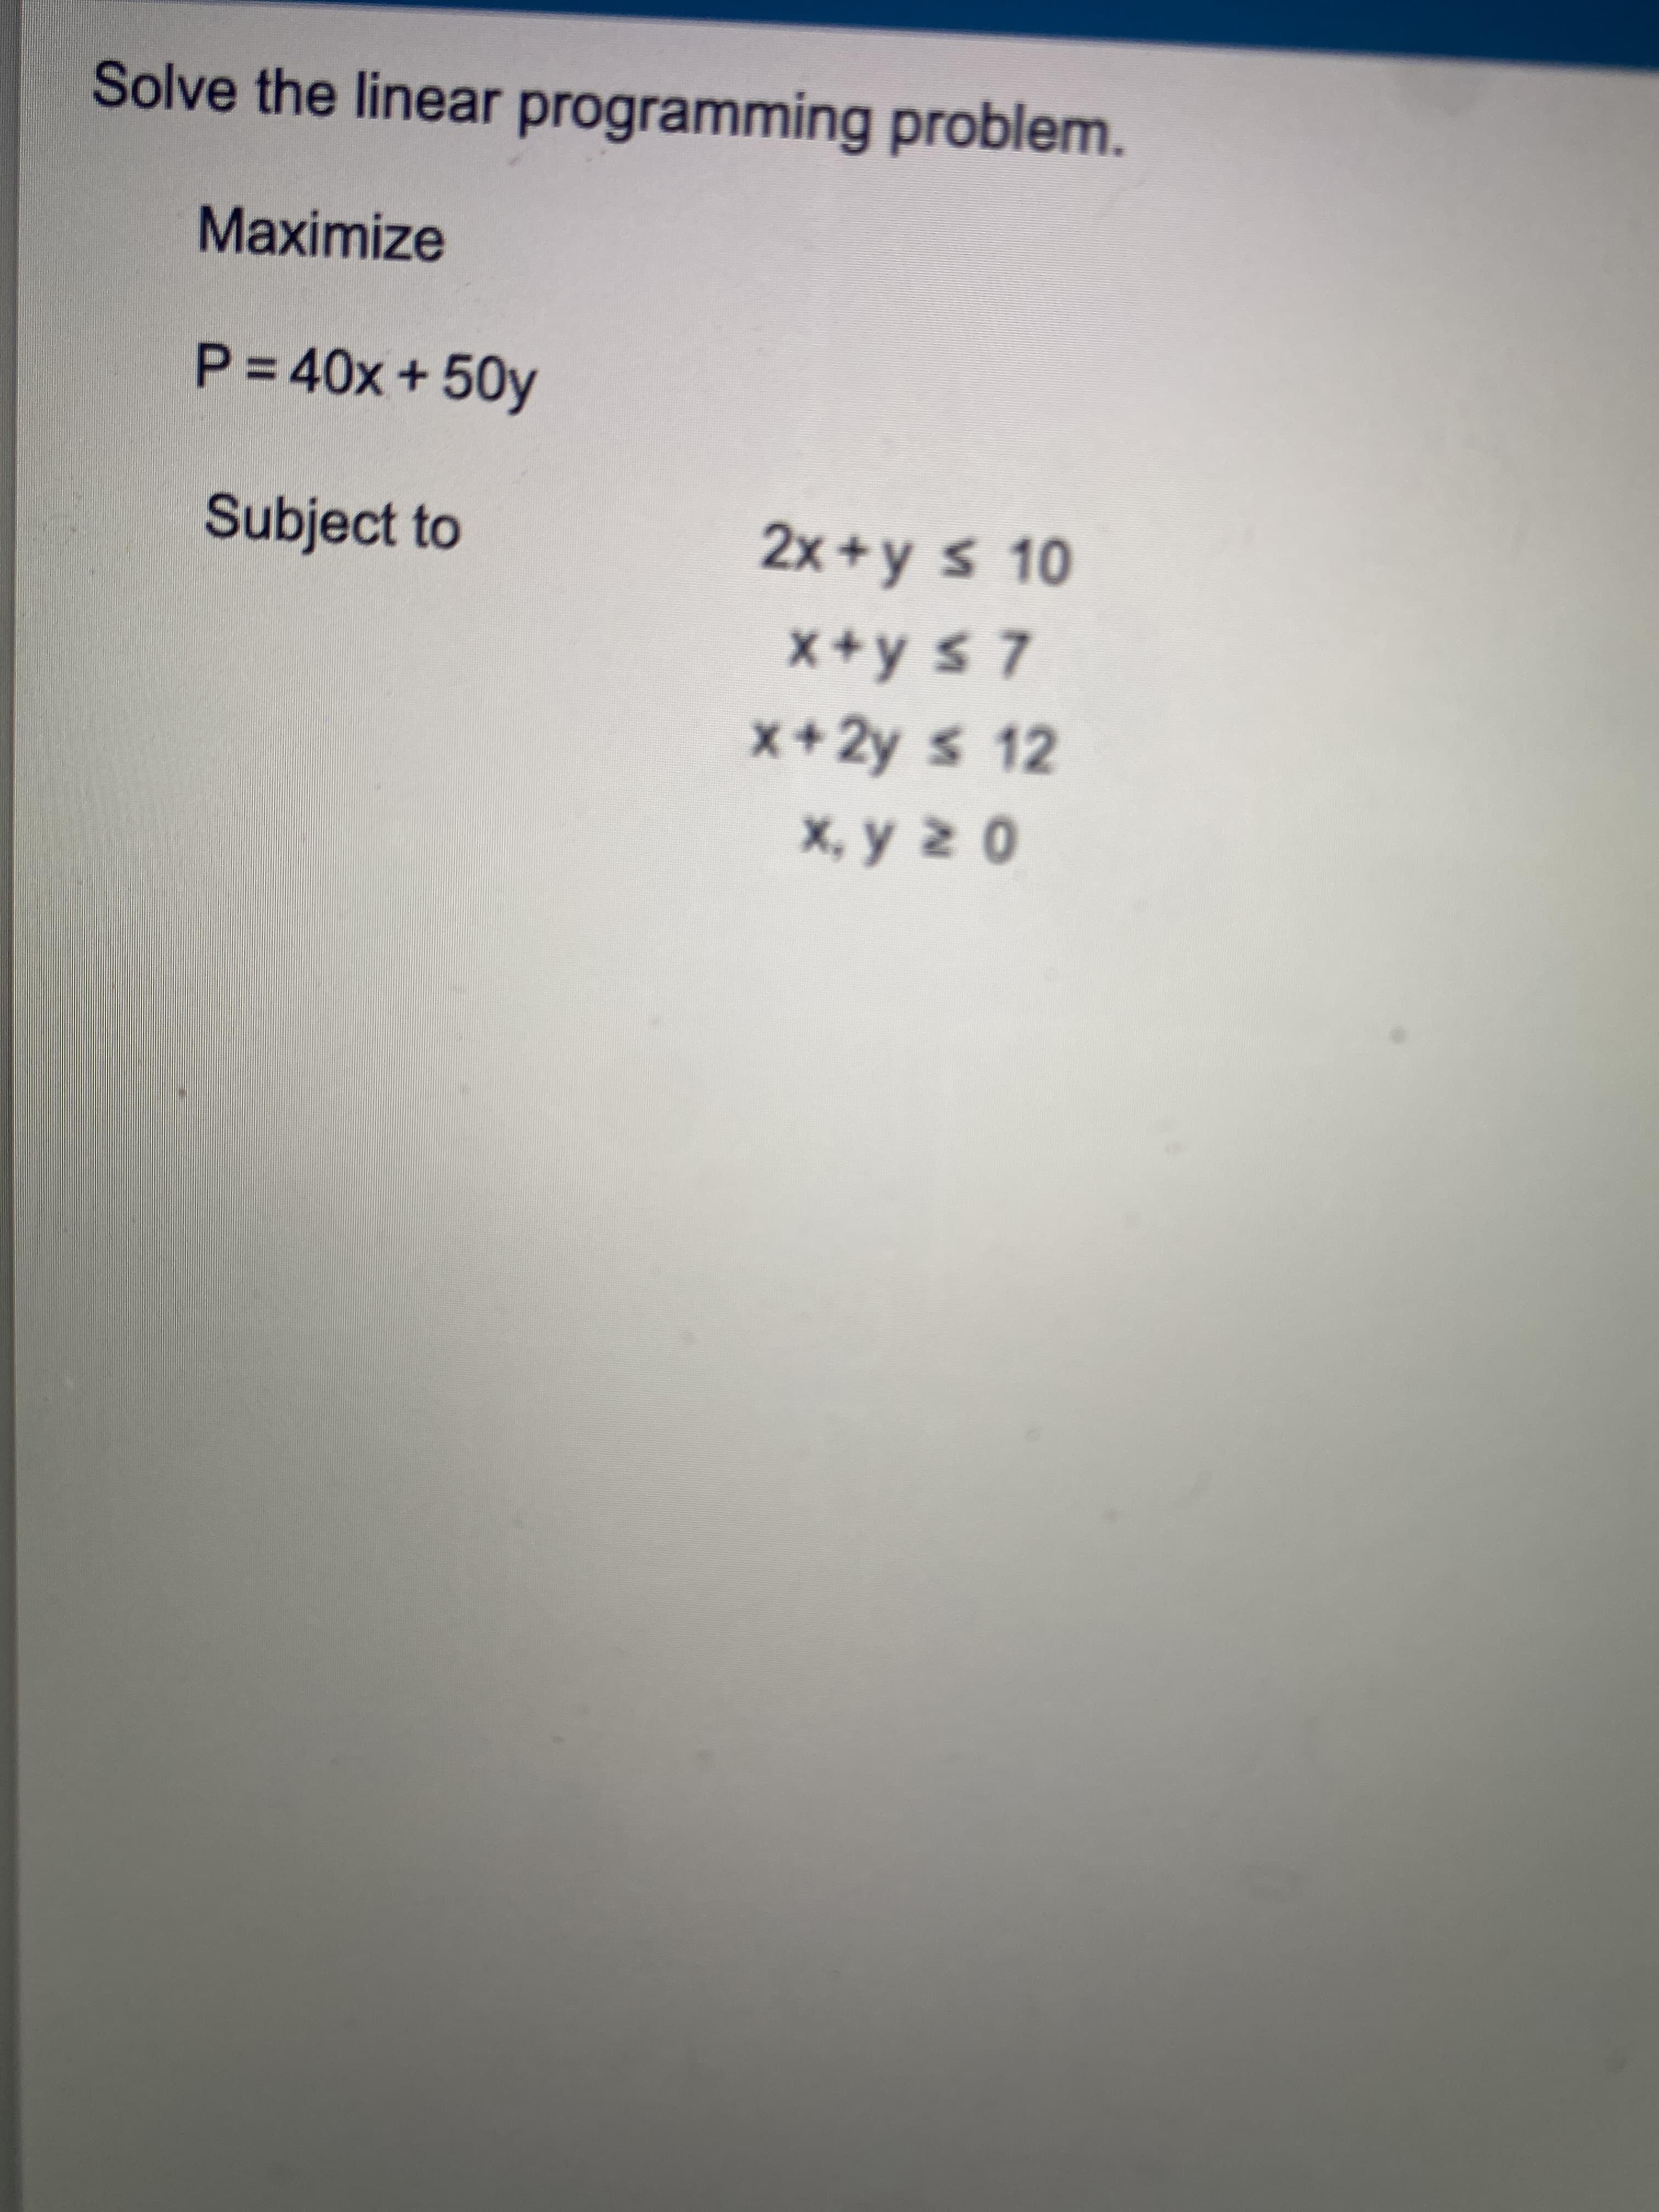 Solve the linear programming problem.
Maximize
P%340x+50y
Subject to
2x+y s 10
X+y s 7
x+2y s 12
